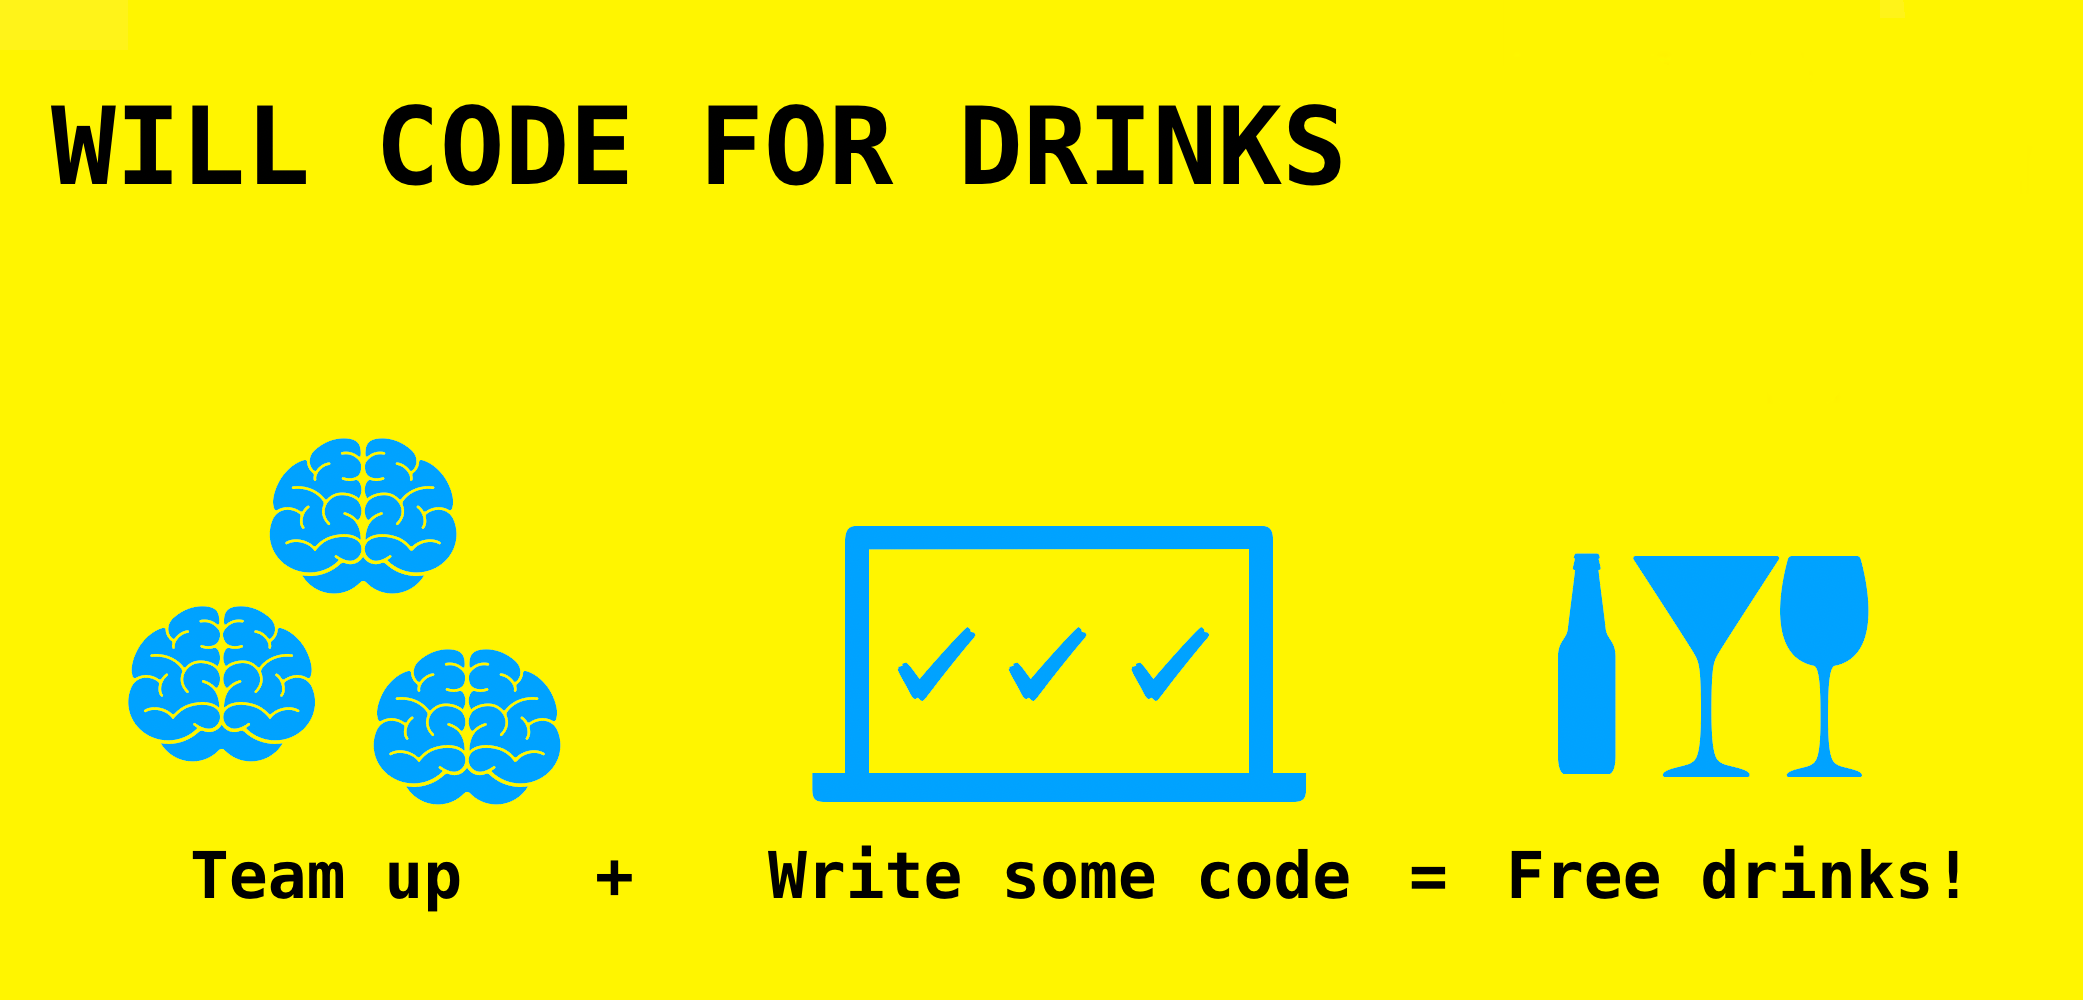 Team up + Write some code = Free drinks!